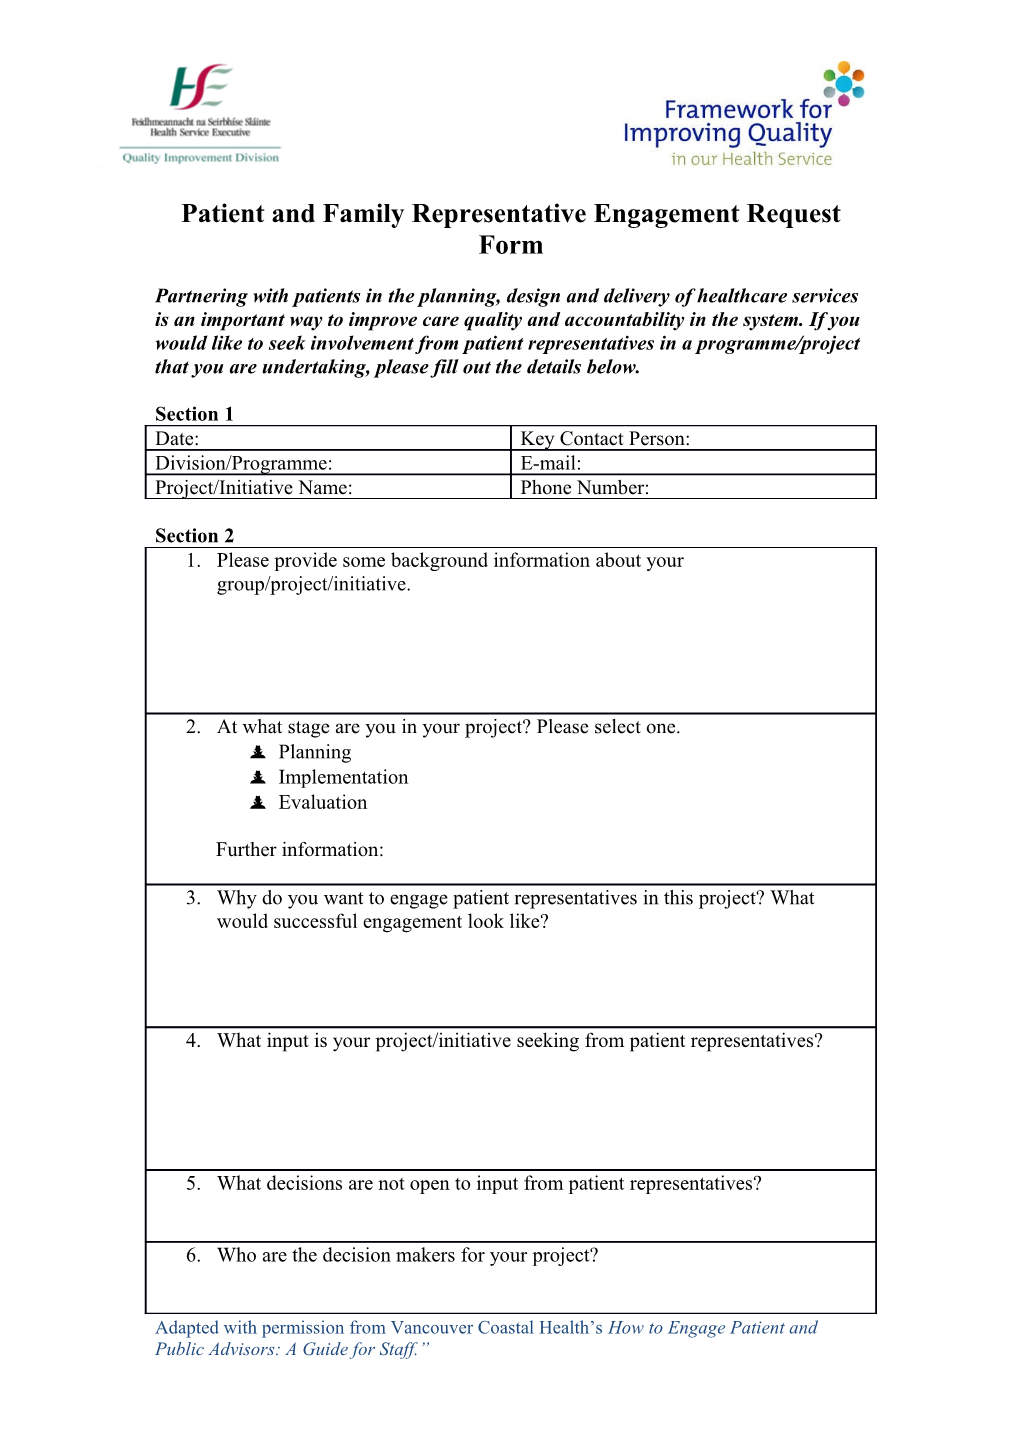 Patient and Family Representative Engagement Request Form